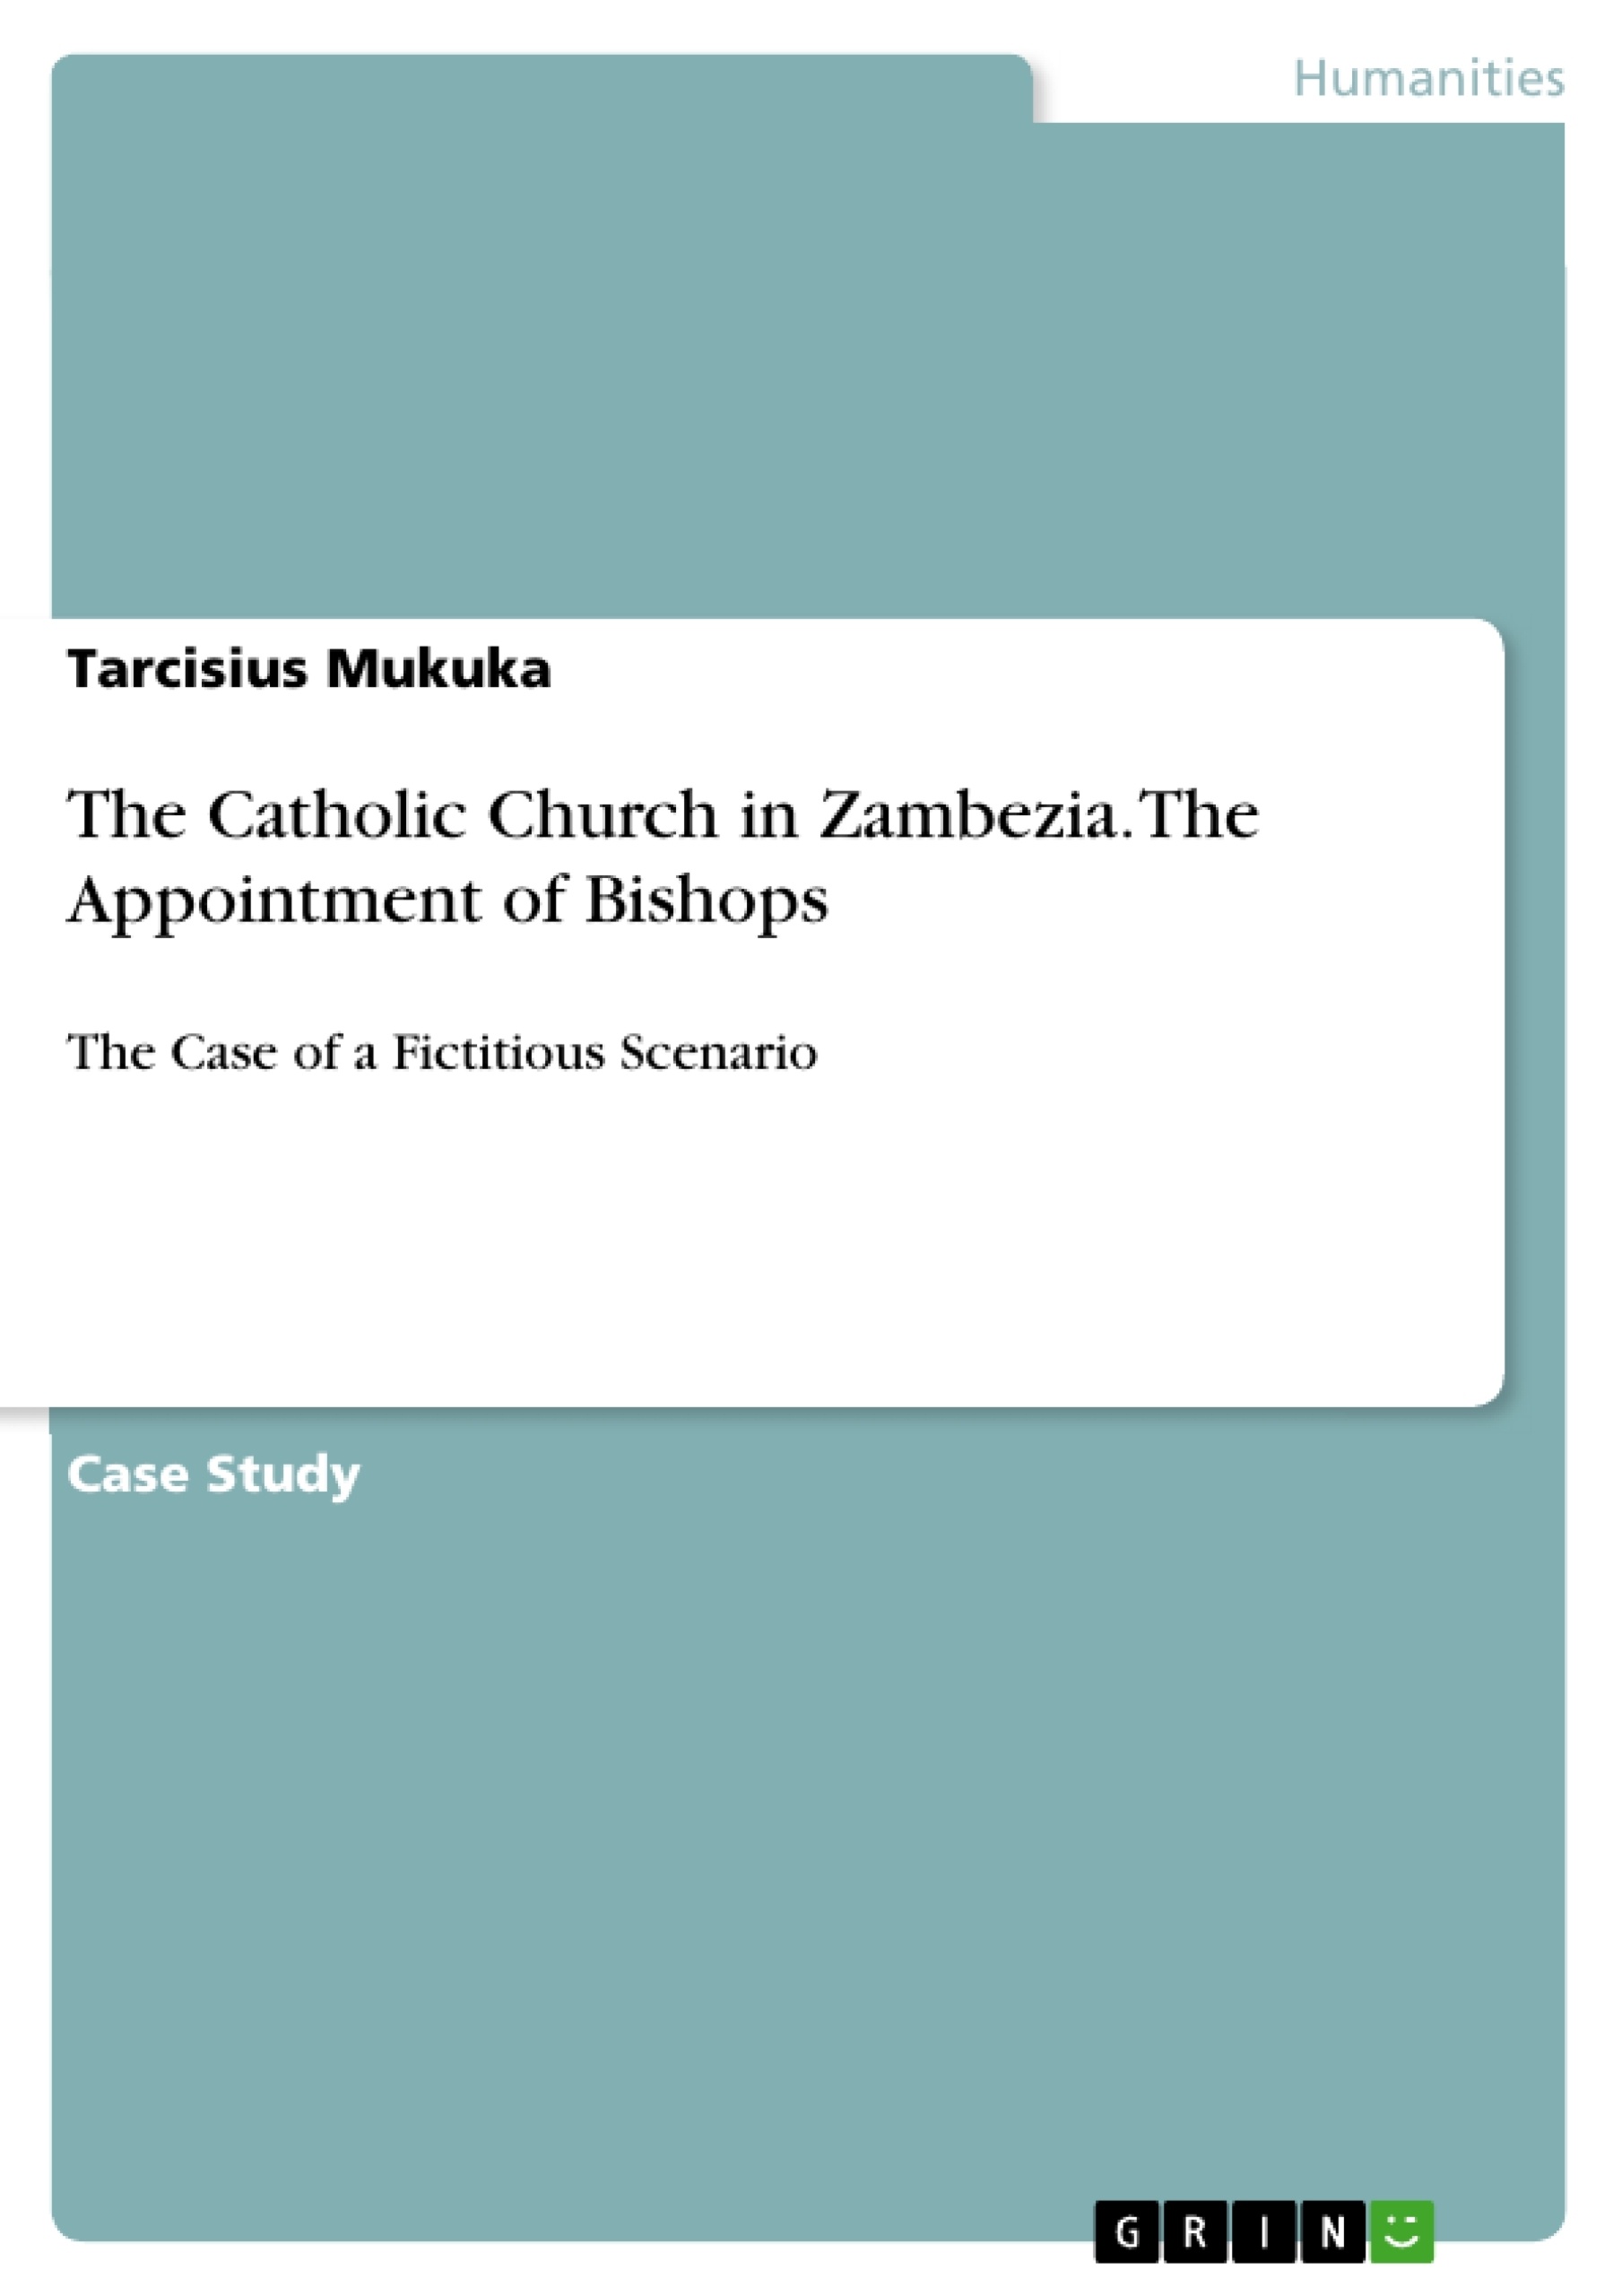 Title: The Catholic Church in Zambezia. The Appointment of Bishops